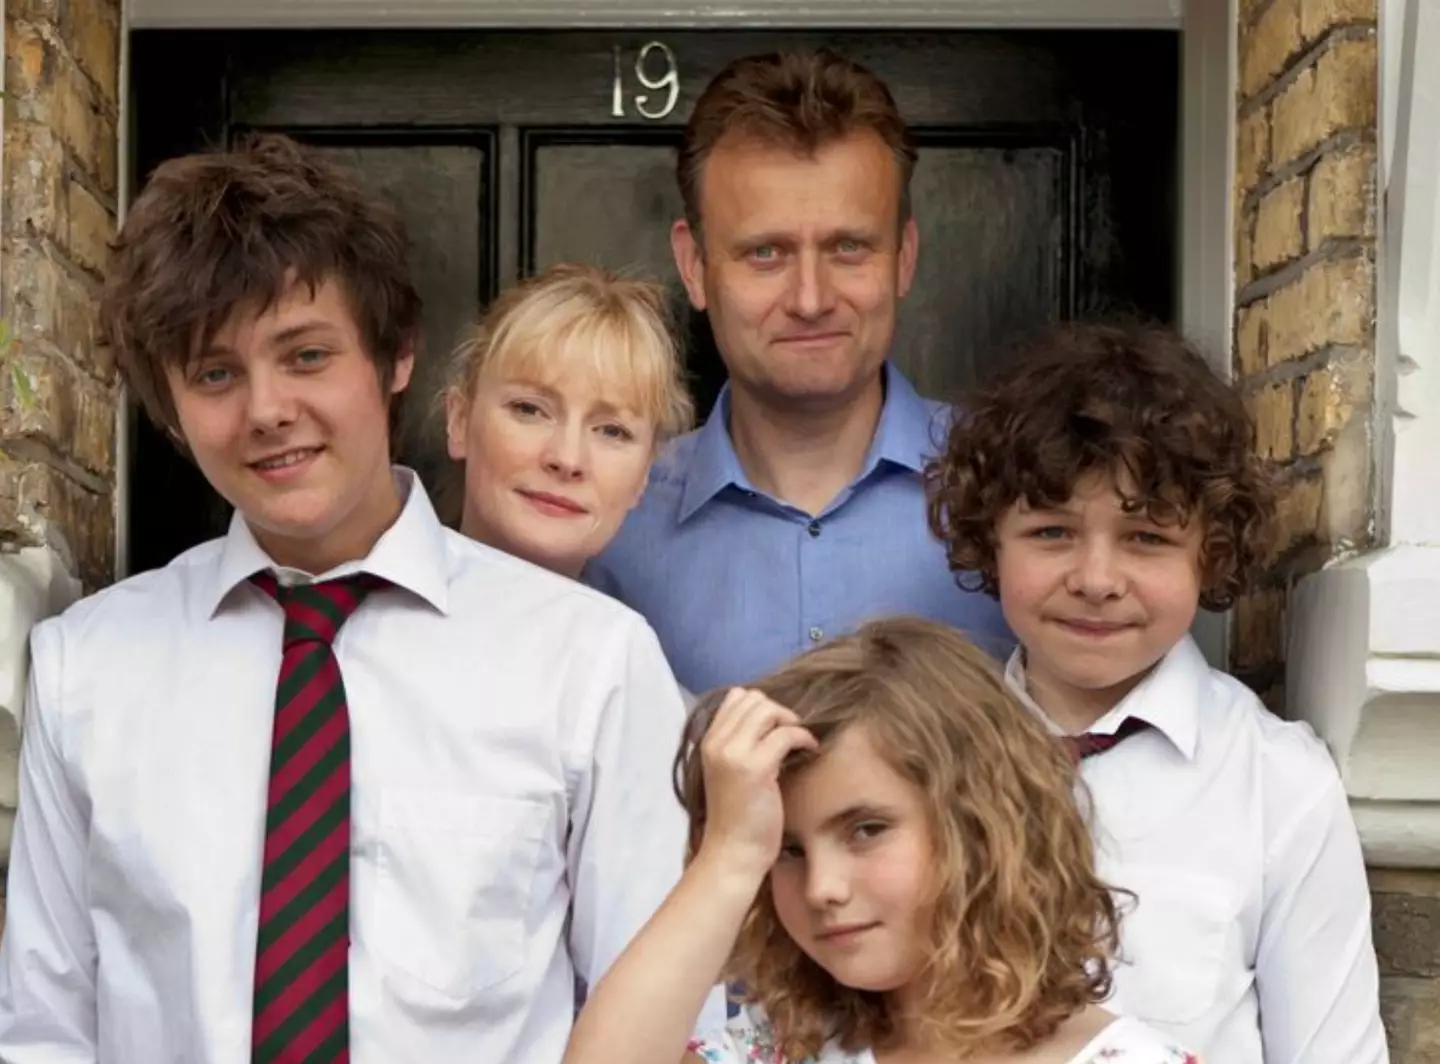 Daniel Roche played Ben in Outnumbered.